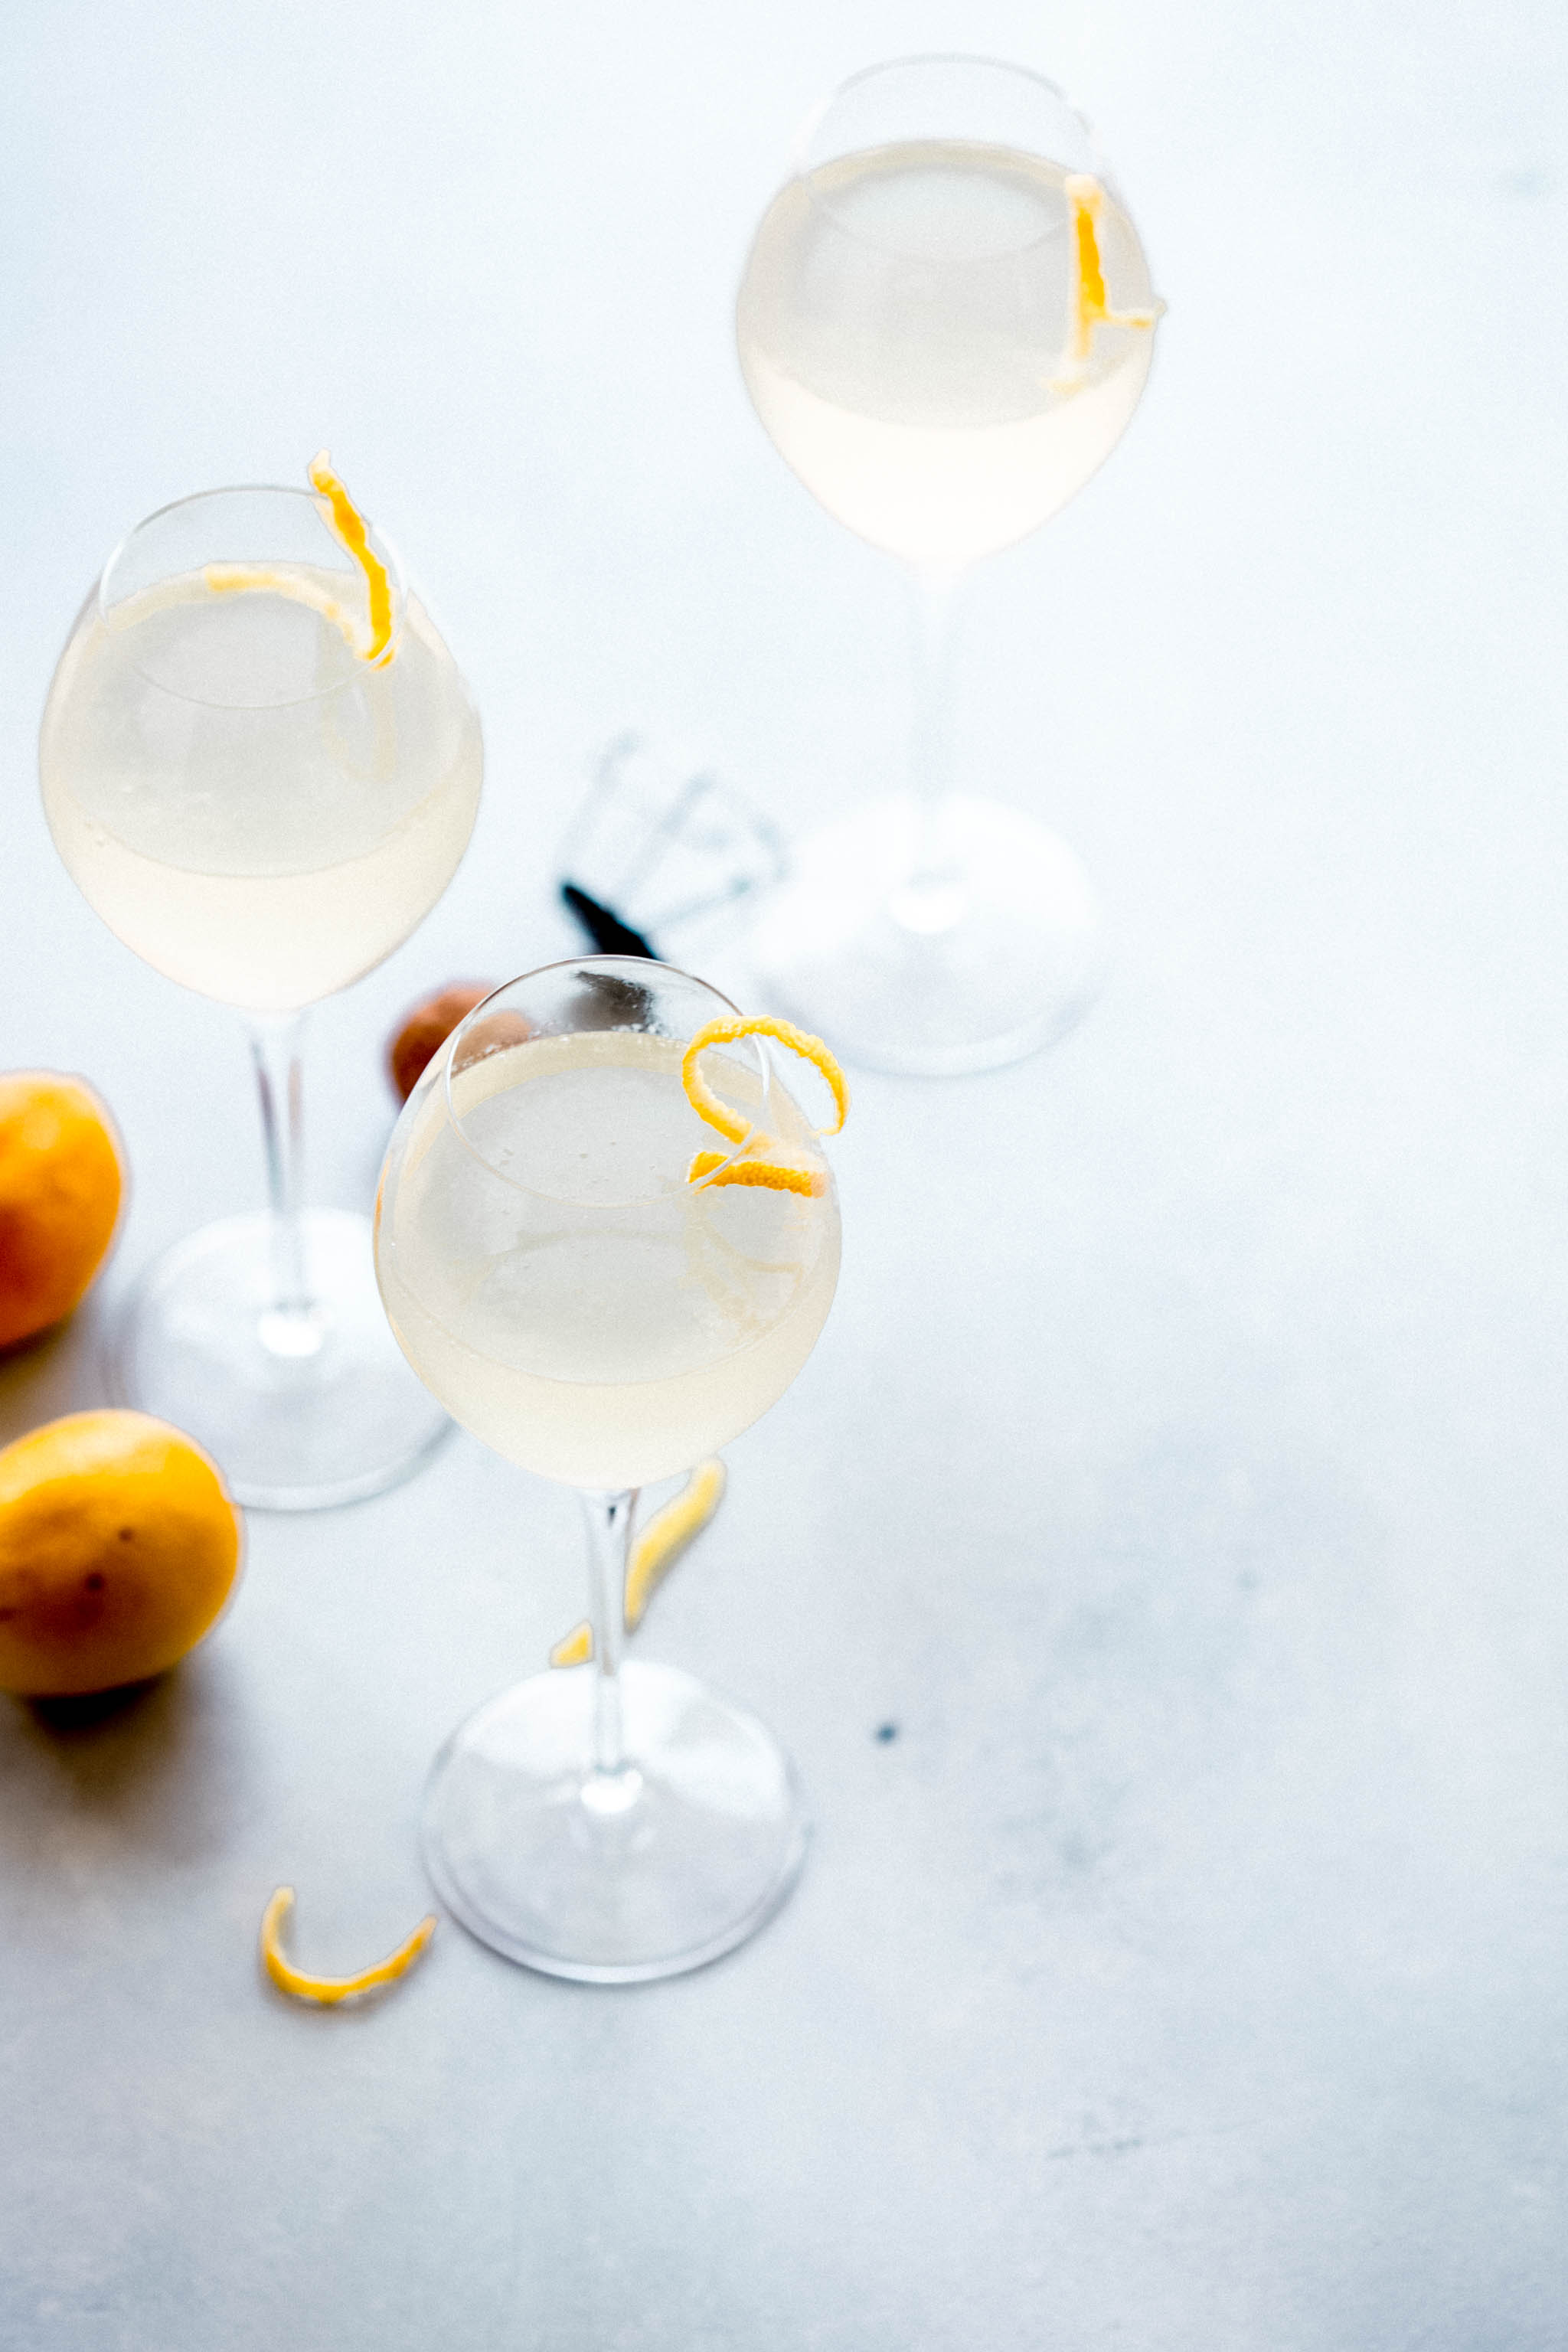 Three French 75 cocktails garnished with lemon twists.